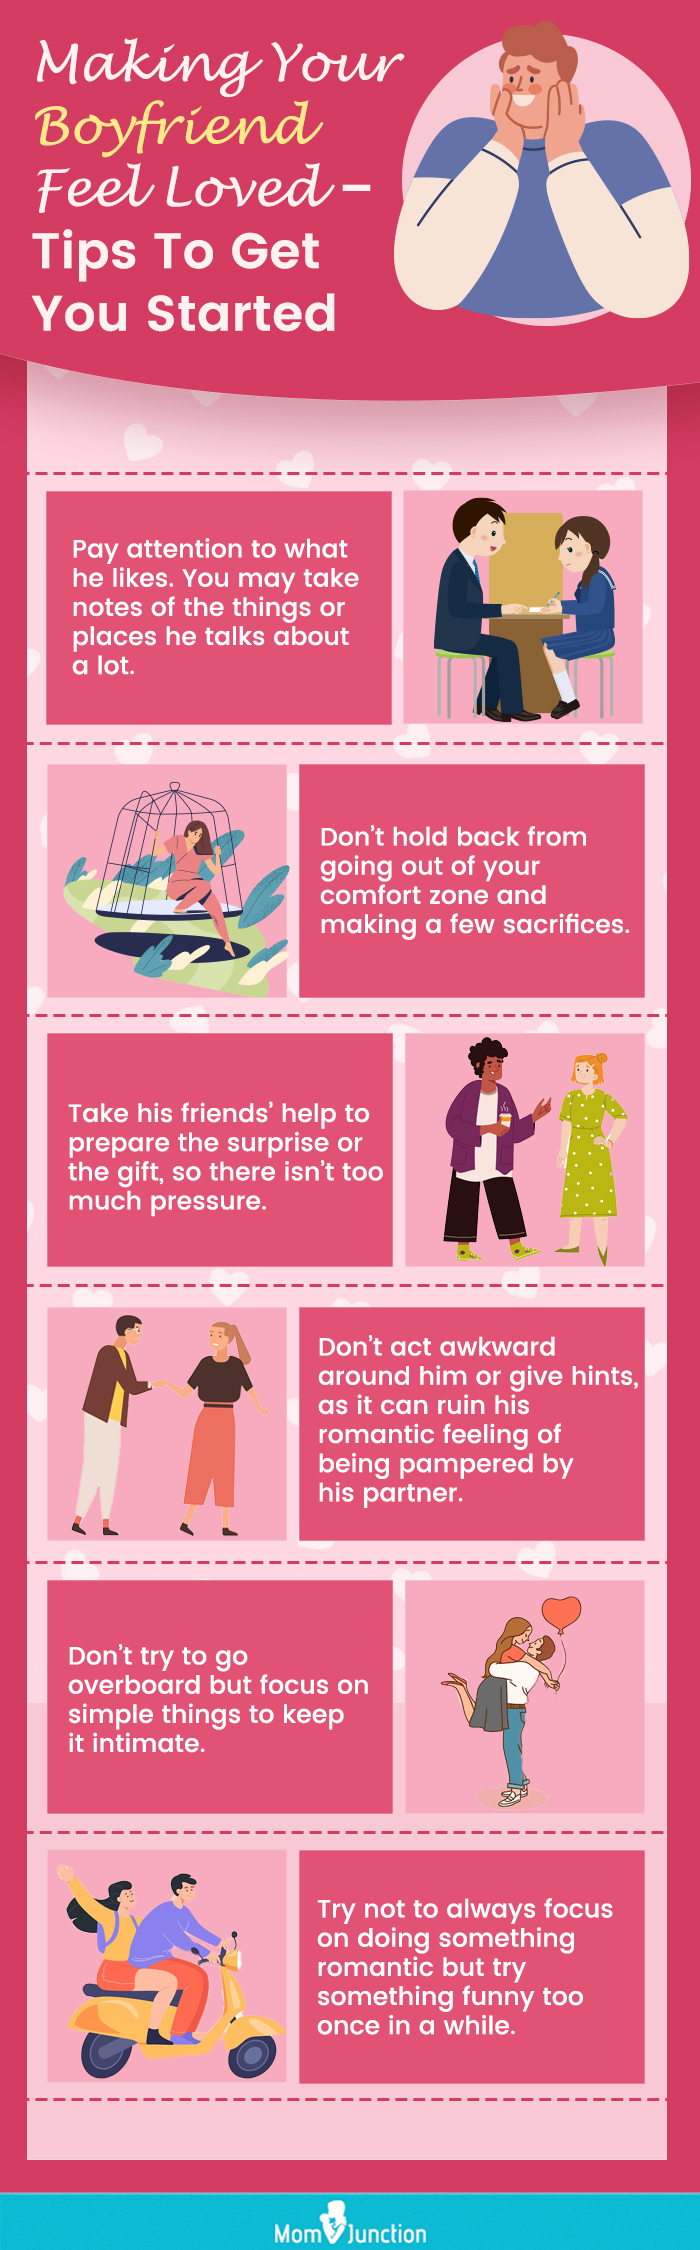 making your boyfriend feel loved (infographic)